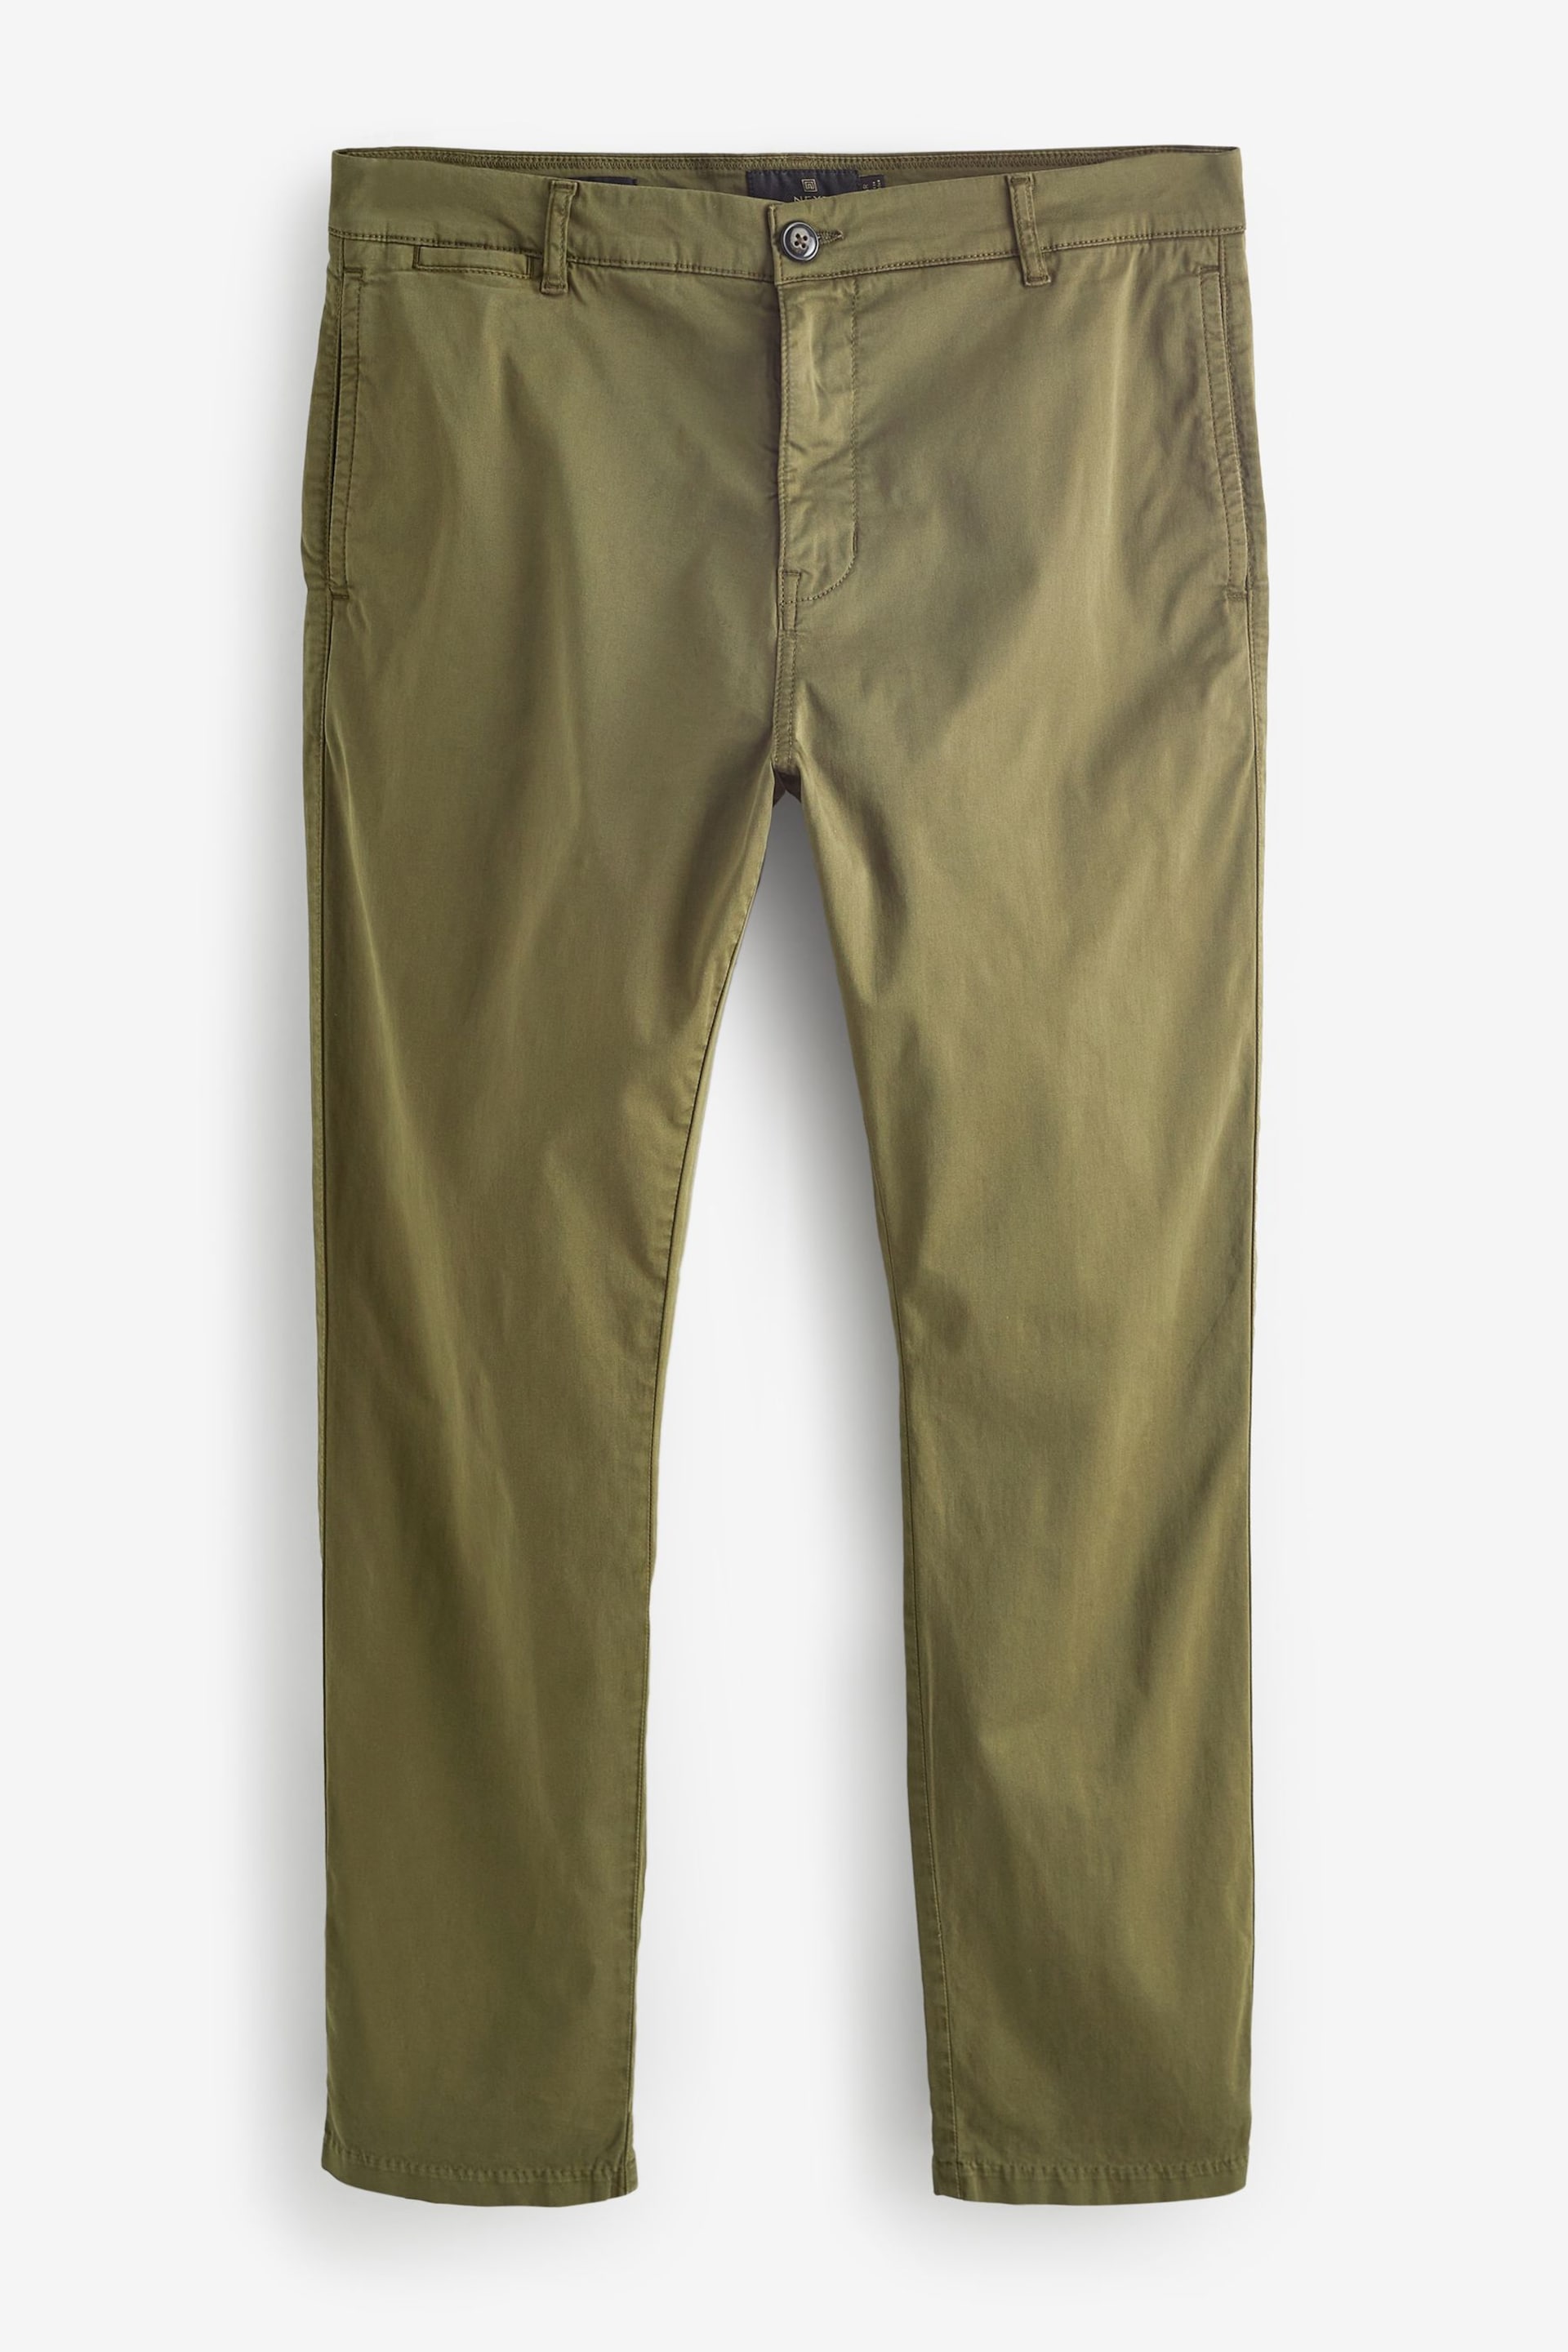 Khaki Green Slim Fit Premium Laundered Stretch Chinos Trousers - Image 9 of 12